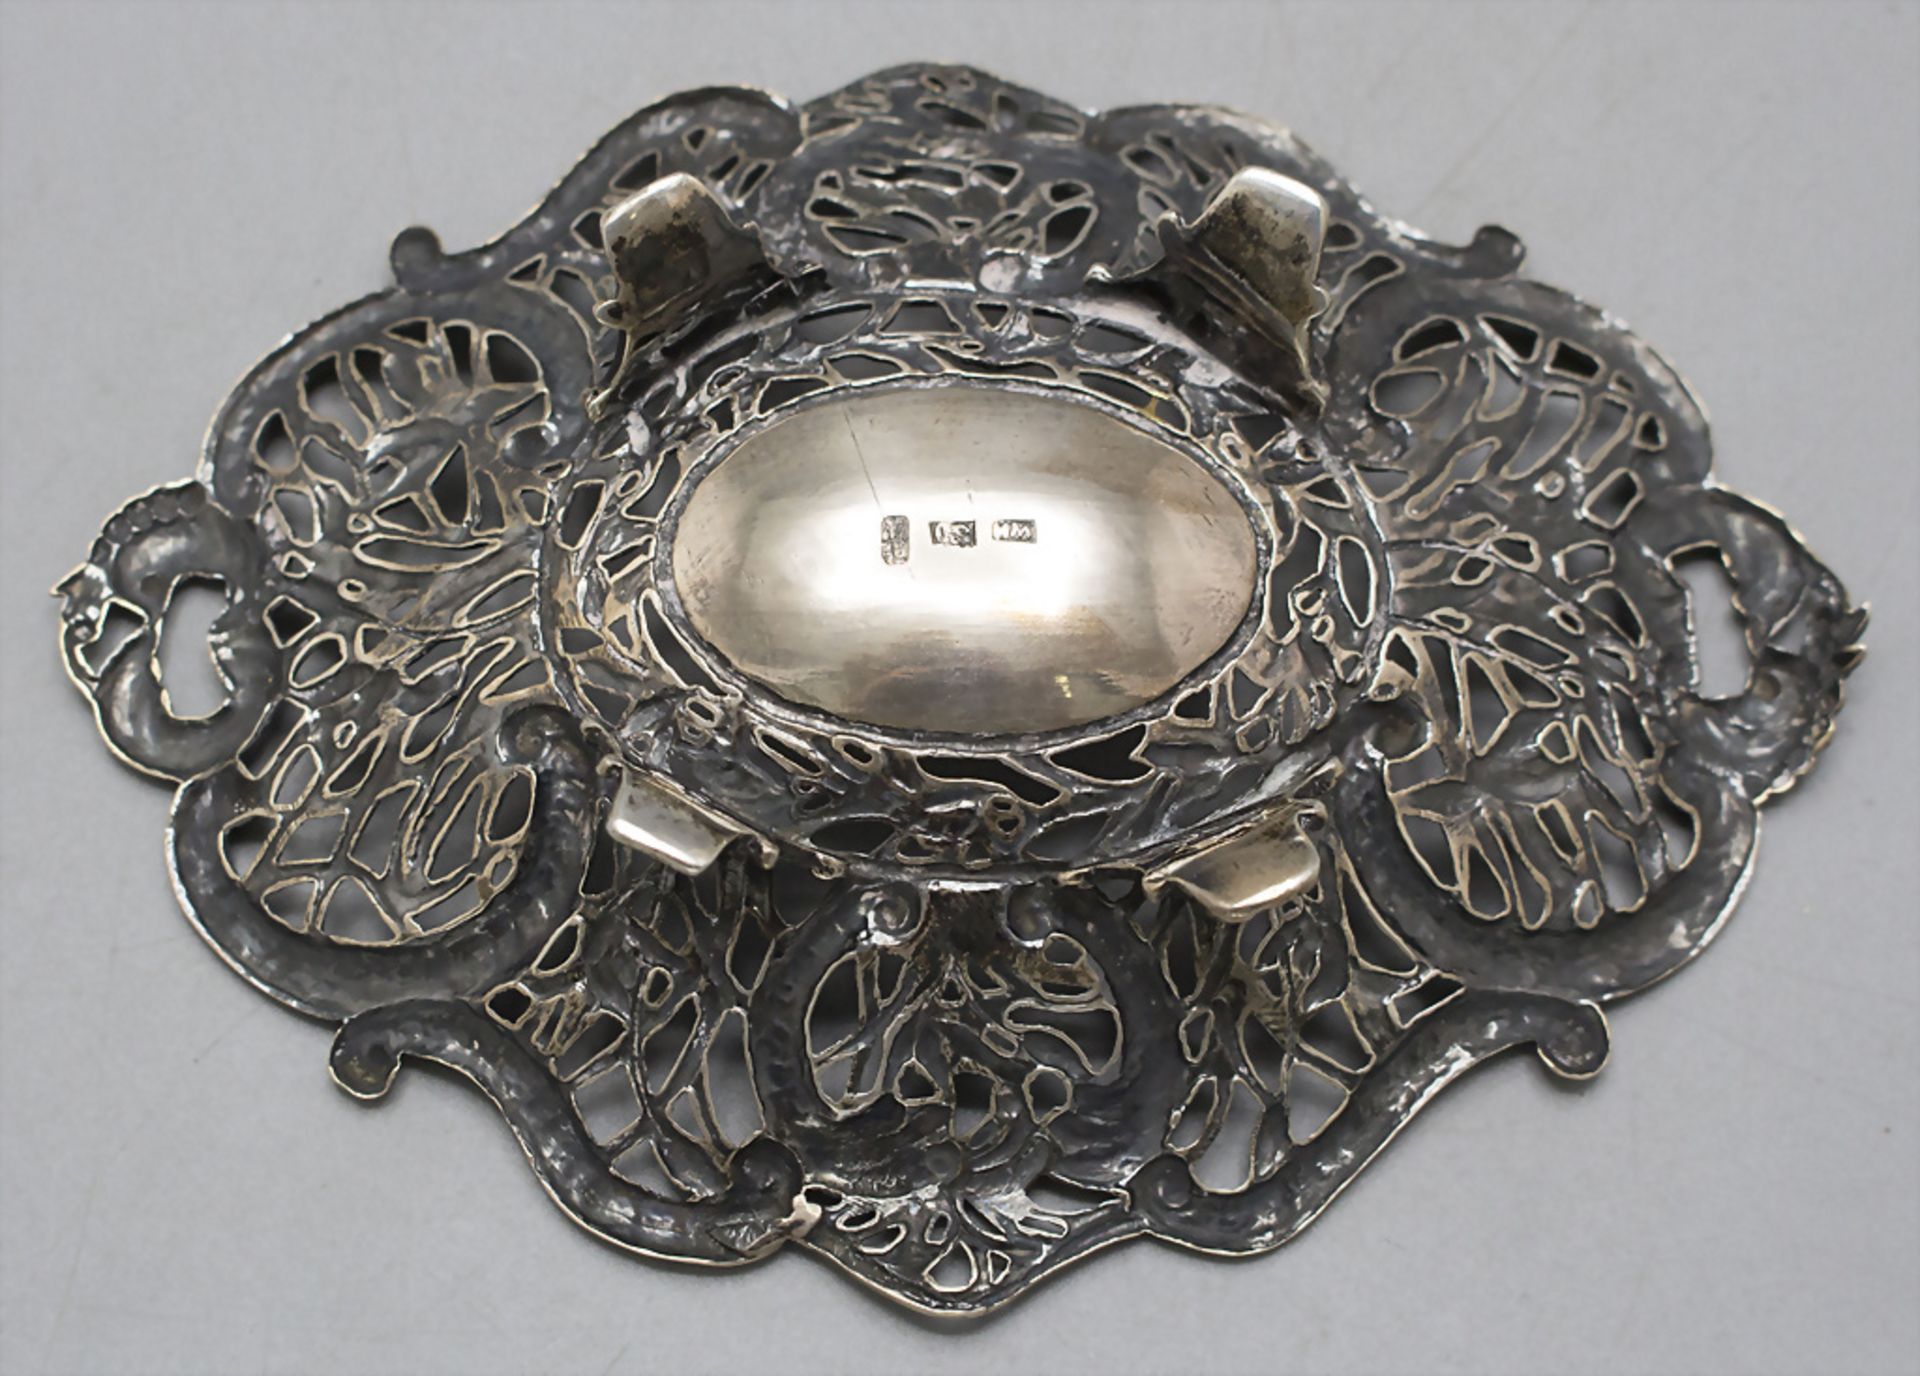 Kleine Korbschale / A small Chinese Export silver basket bowl, Wang Hing & Co., Hong Kong, um 1880 - Image 4 of 5